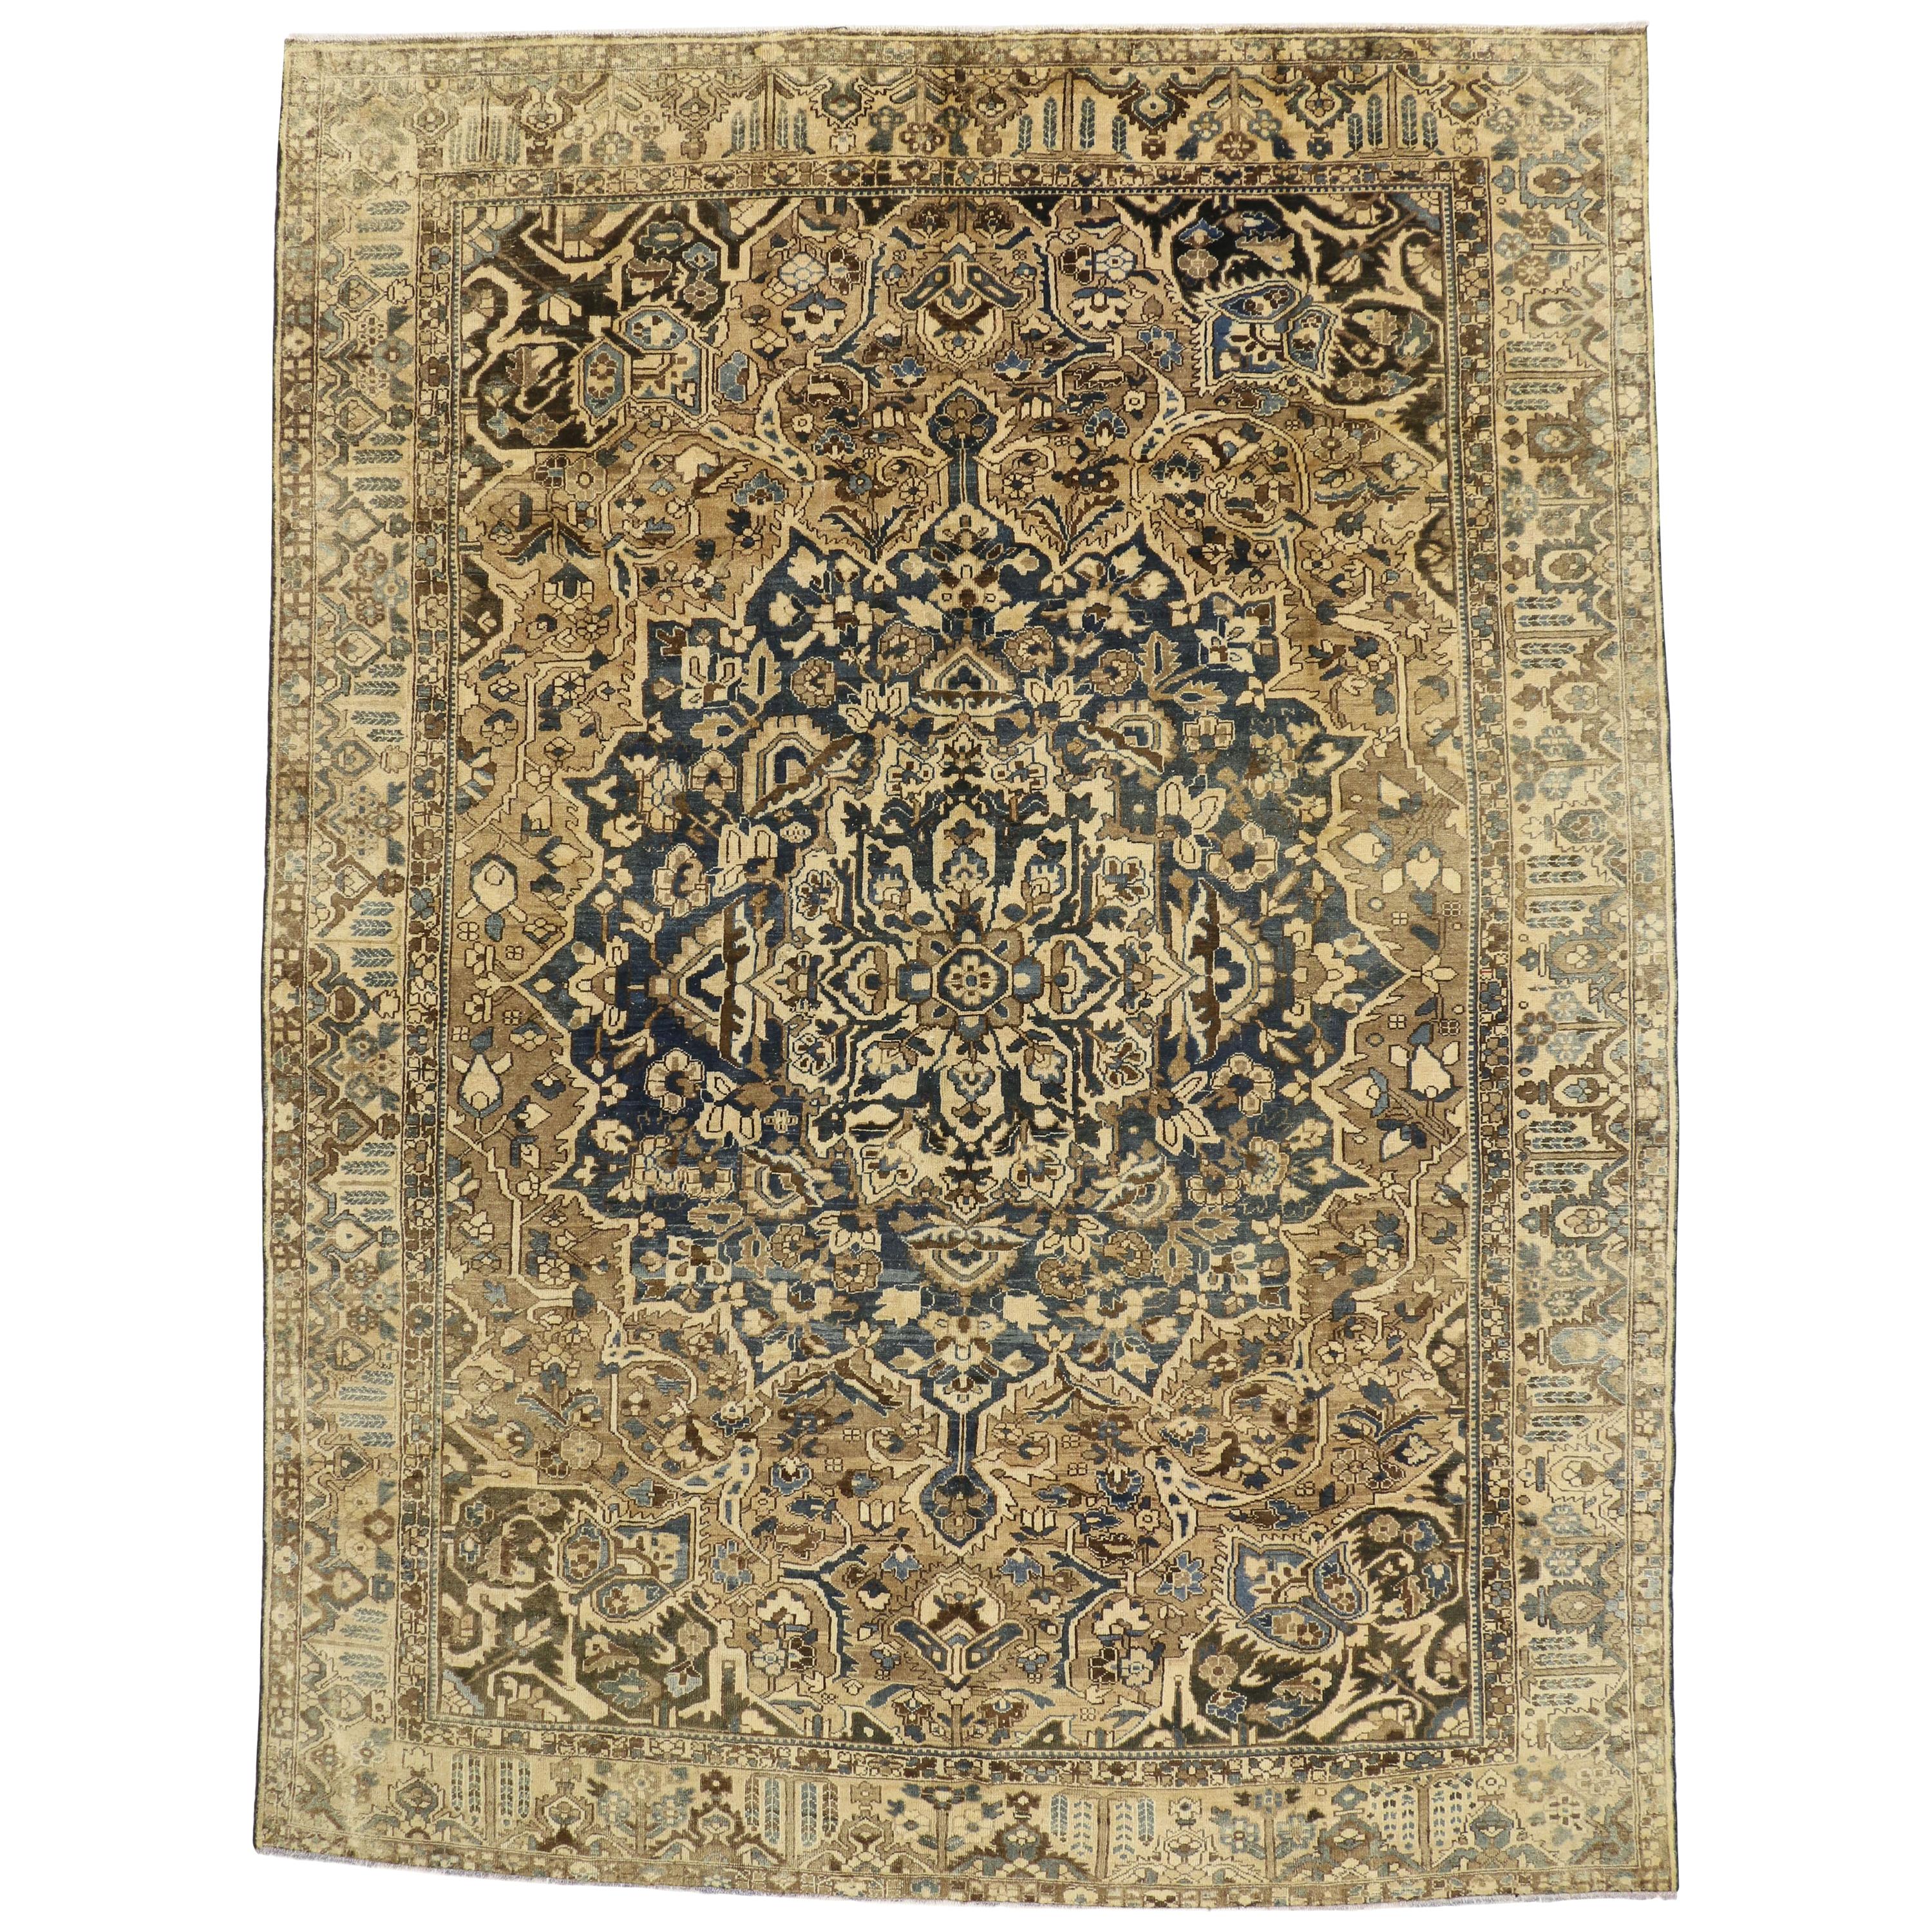 Antique Persian Bakhtiari Rug with in Traditional Modern Style